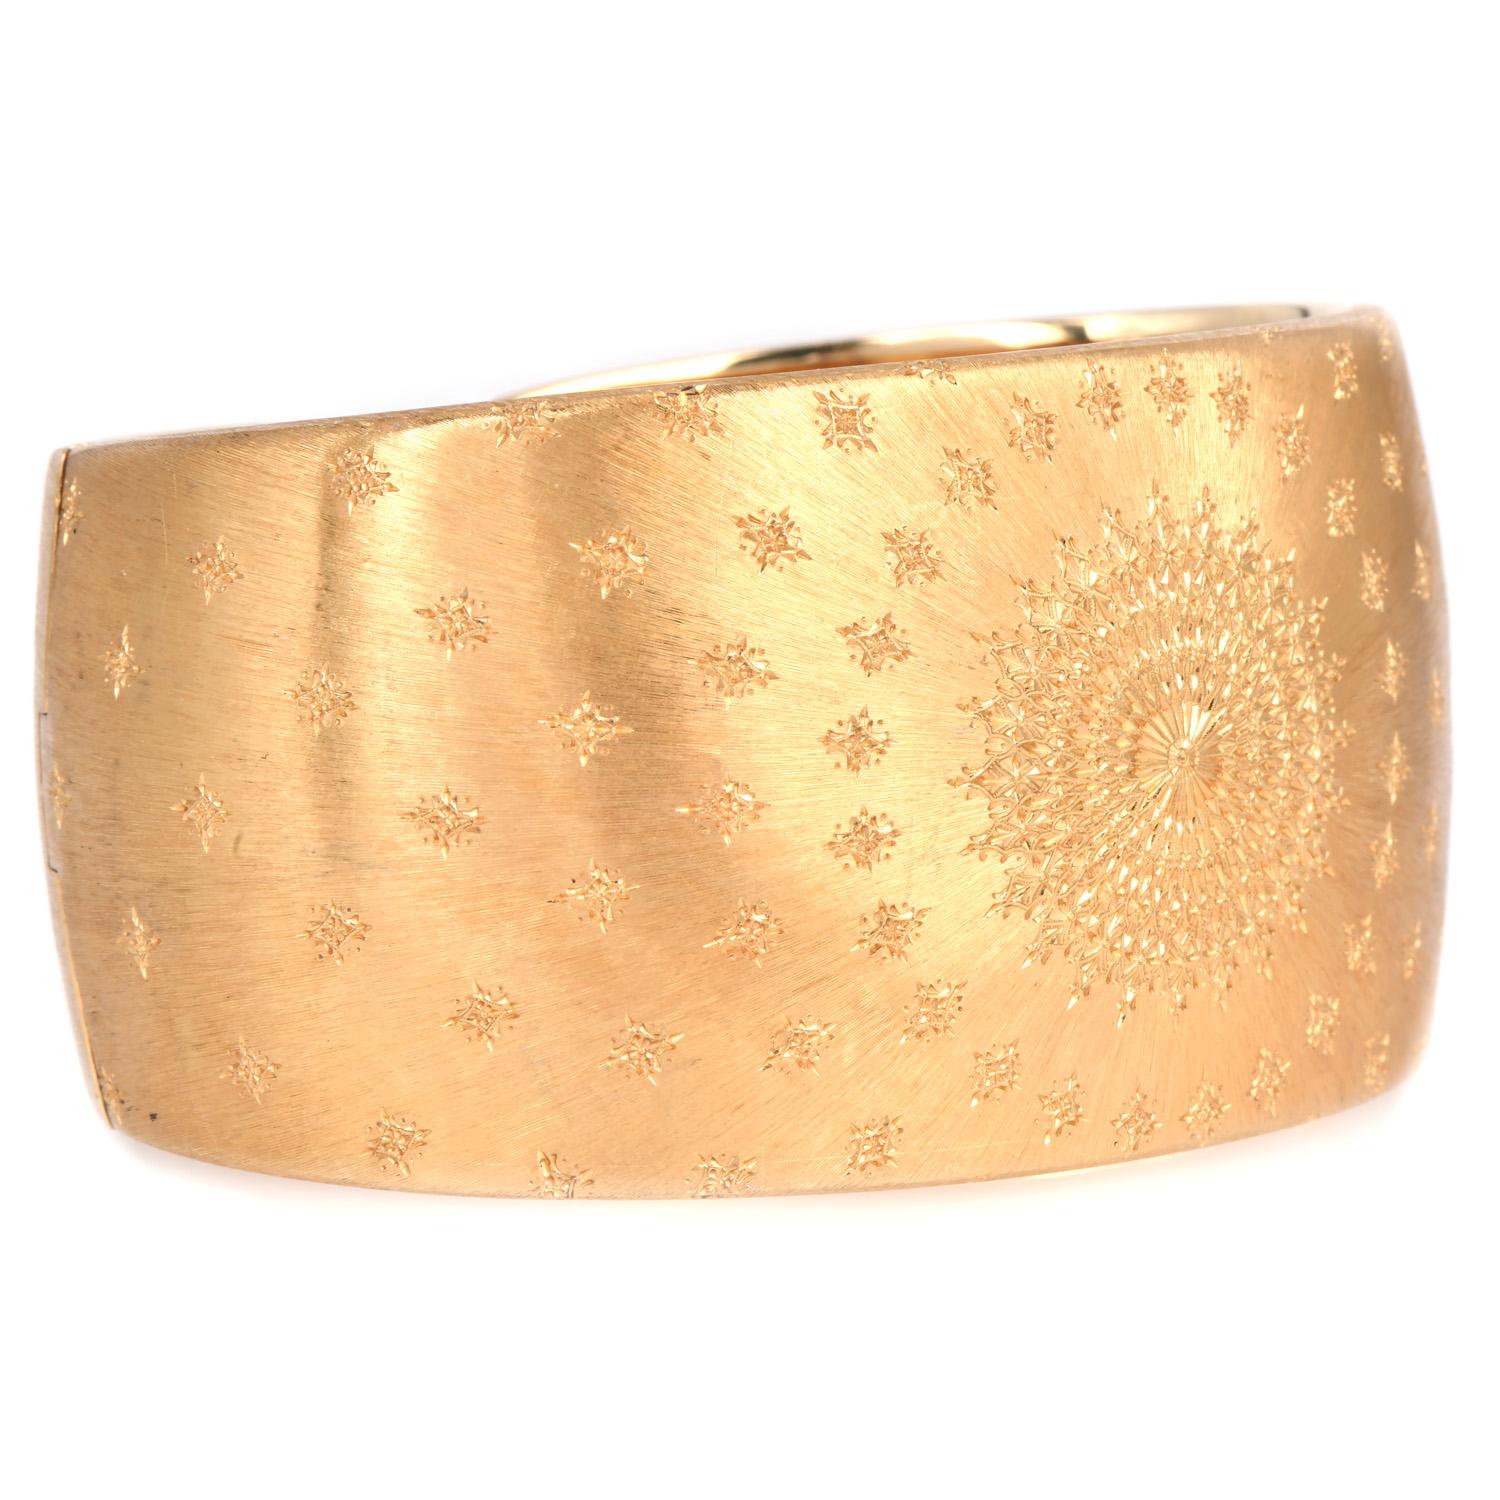 Presenting a gorgeous Buccellati Cuff bracelet in Solid 18k yellow gold.

An exquisite statement cuff bracelet, a testament to timeless elegance. Crafted from solid 18k yellow gold with a satin finish, this hinged cuff showcases intricate foliate